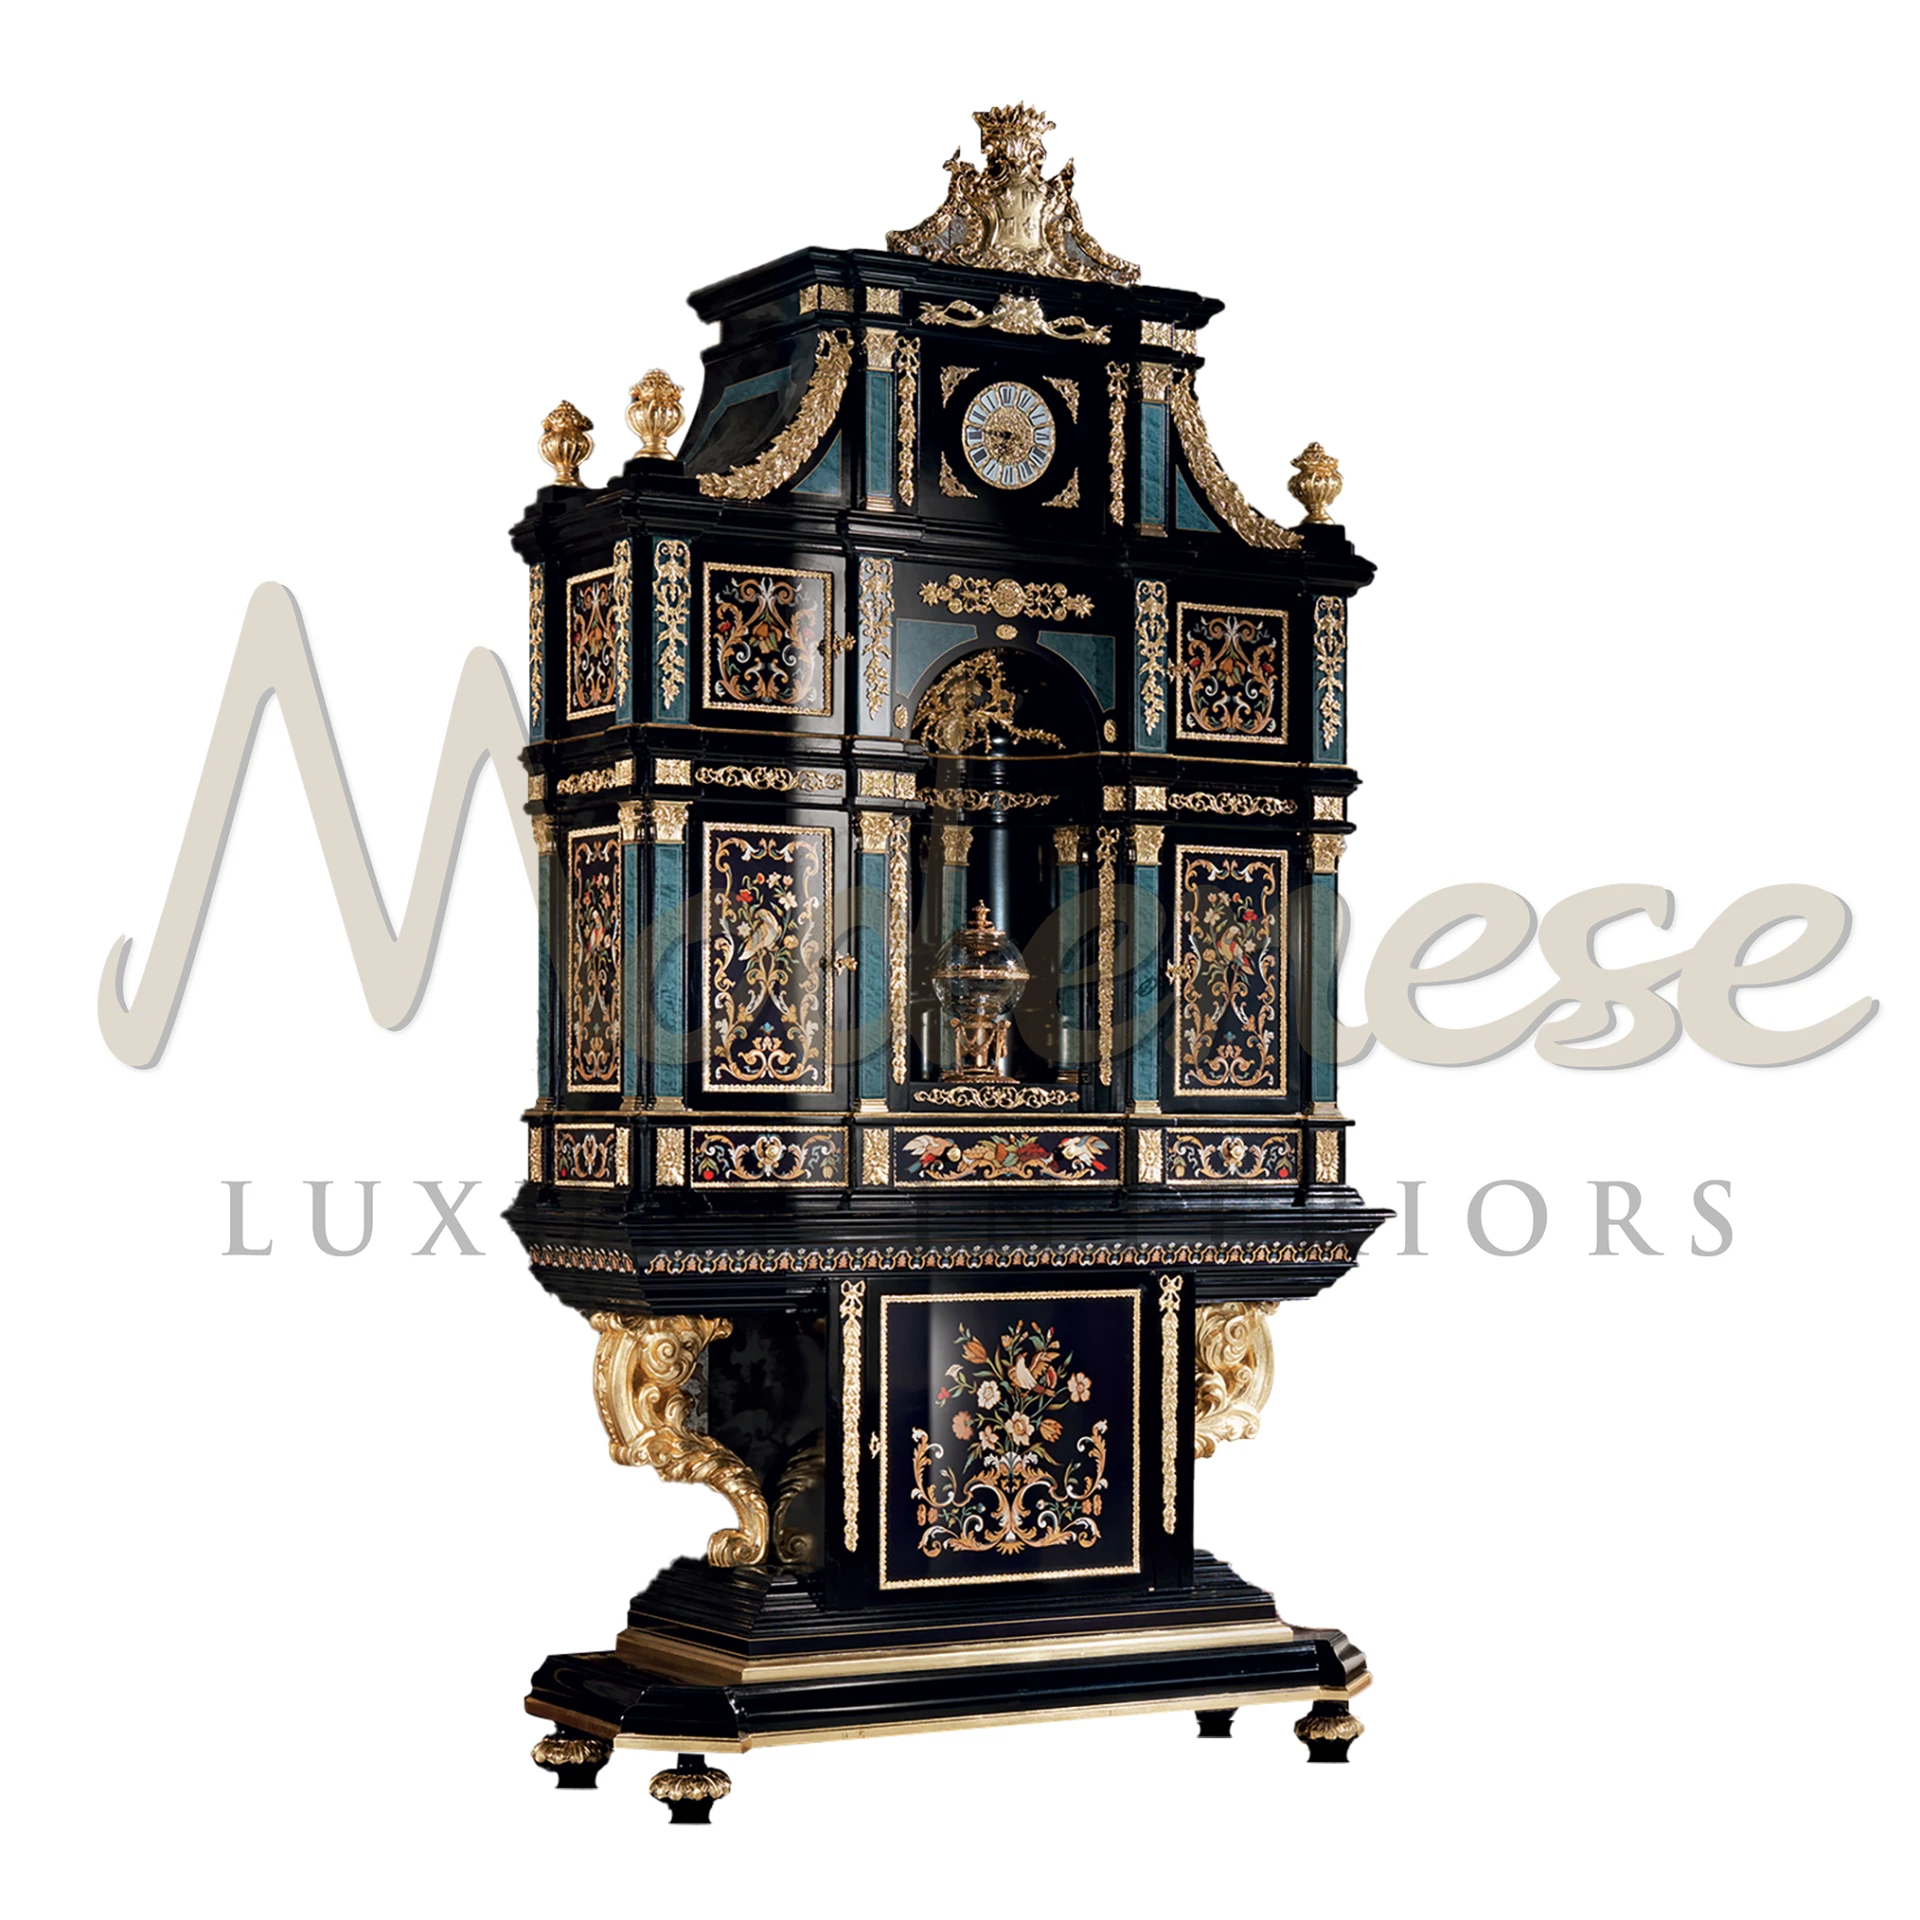 Exquisite dark wooden sideboard with gold leaf details, showcasing luxury Italian design for an elegant home decor addition.